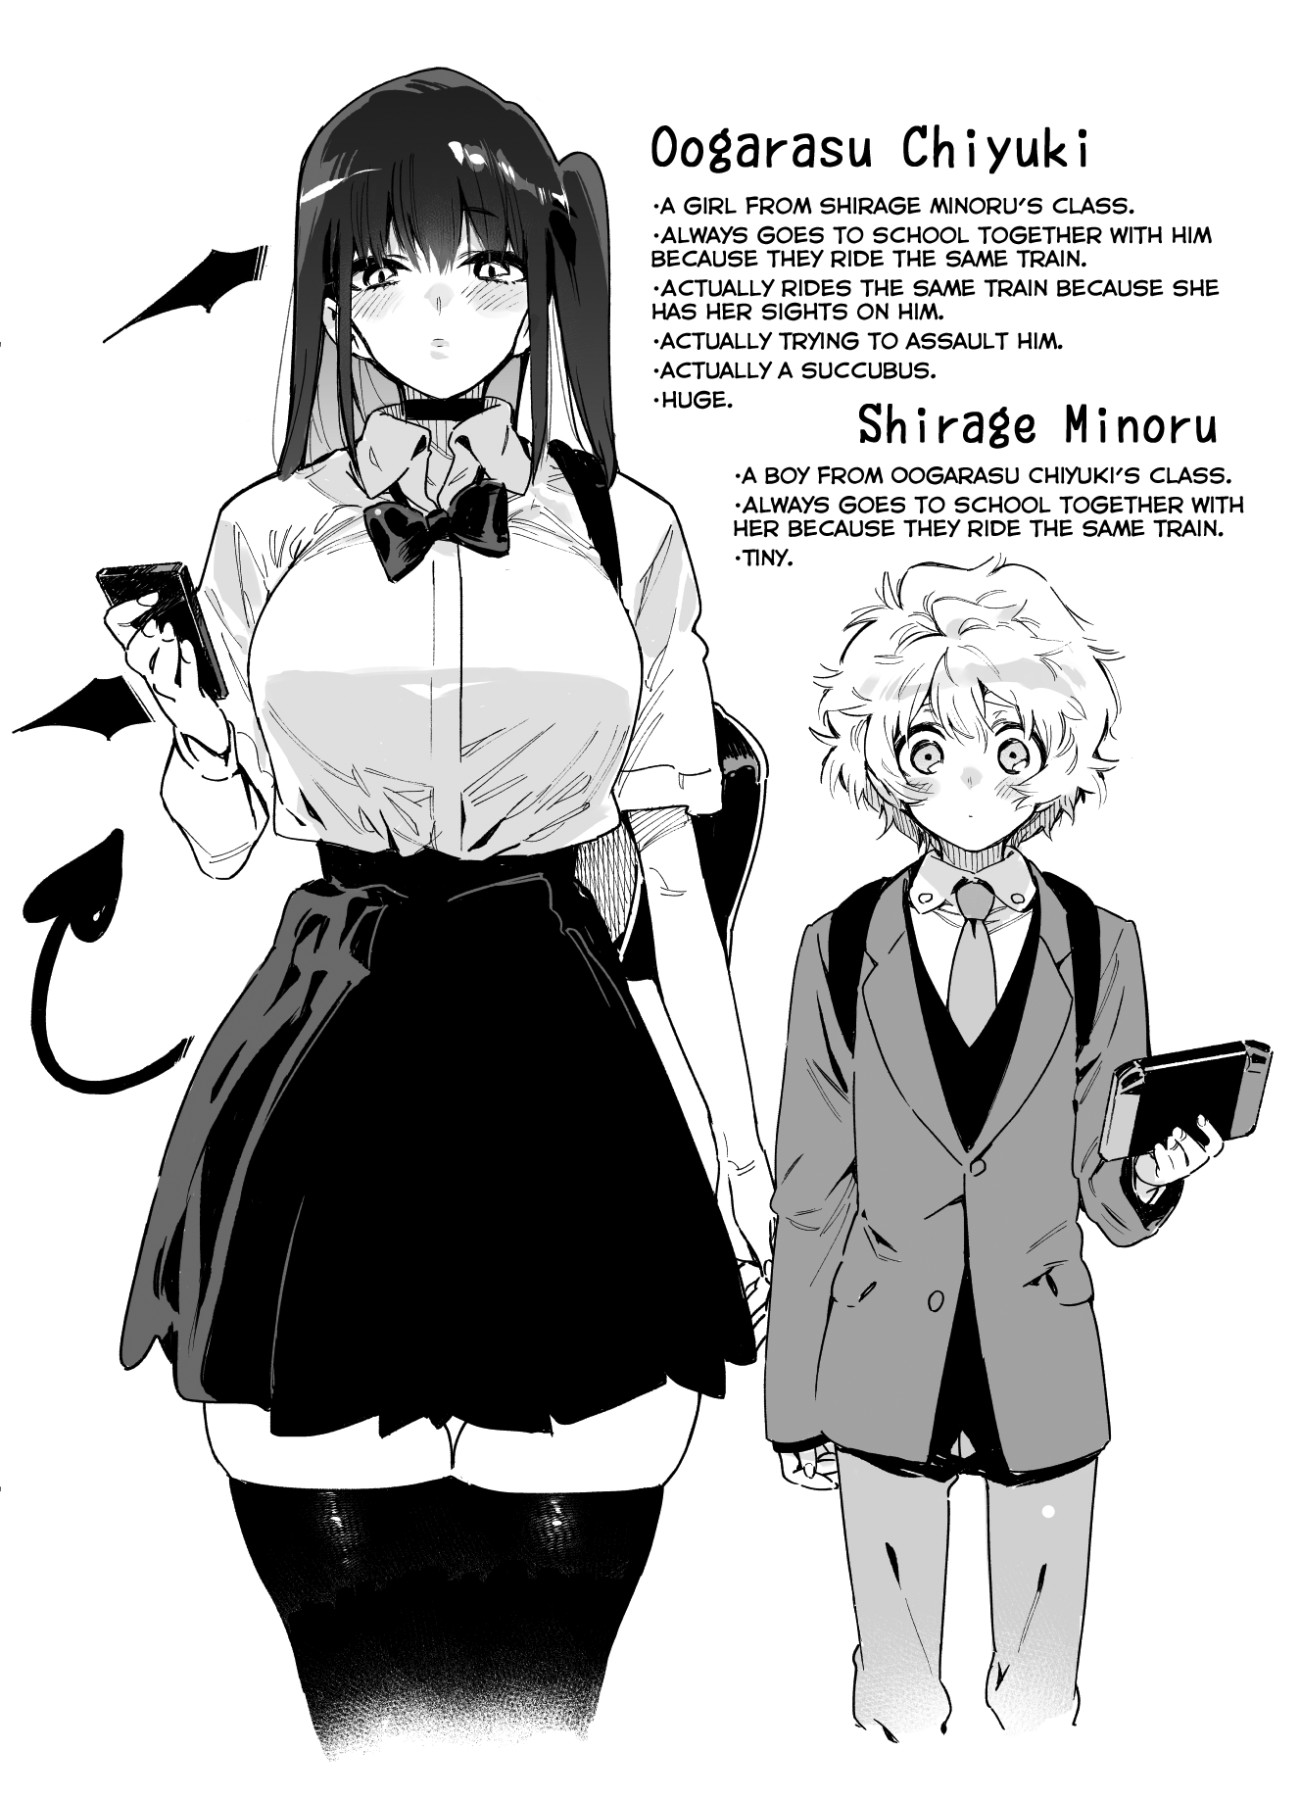 Hentai Manga Comic-Story of the Boy Who Gets Assaulted on the Train to School by a Girl from His Class-Read-3